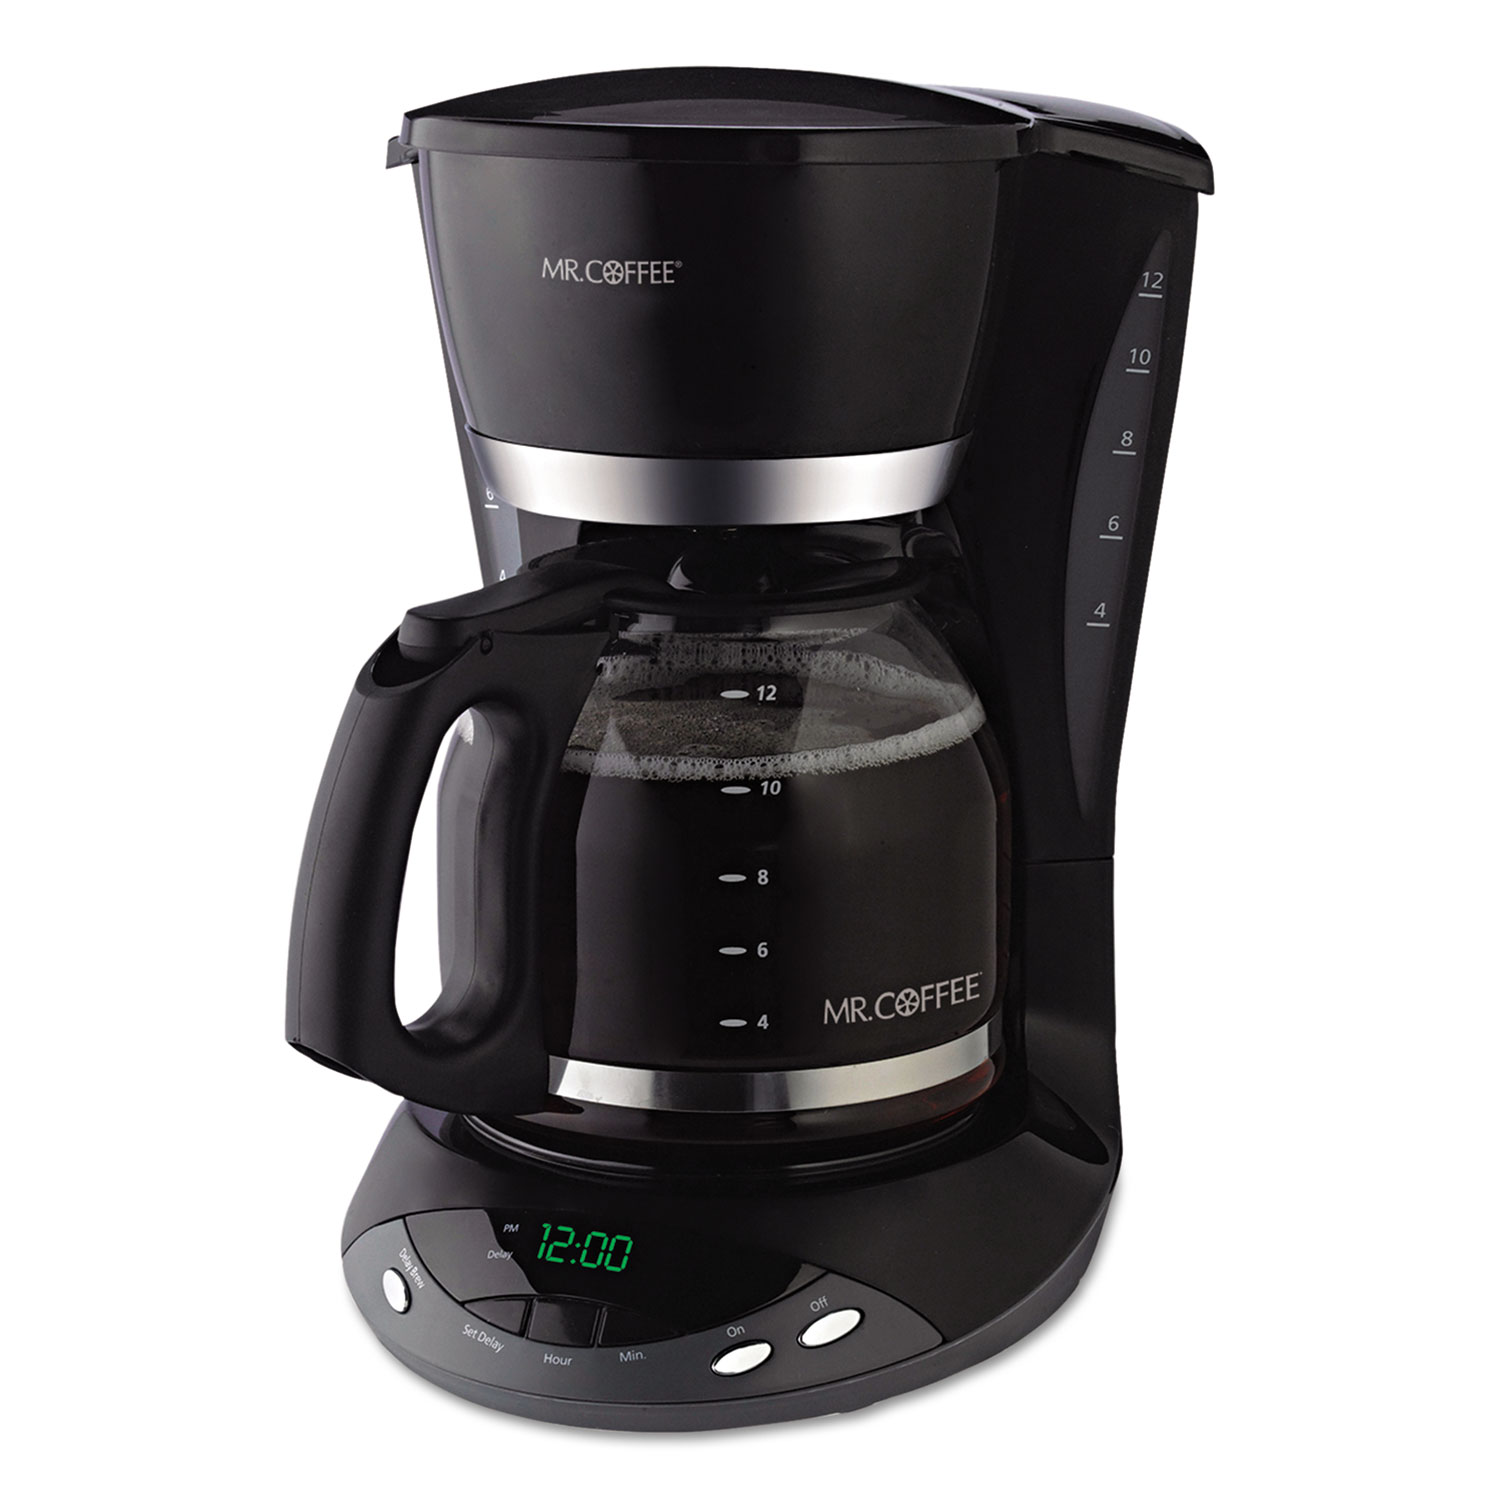  Mr. Coffee DWX23RB 12-Cup Programmable Coffeemaker, Black (MFEDWX23RB) 